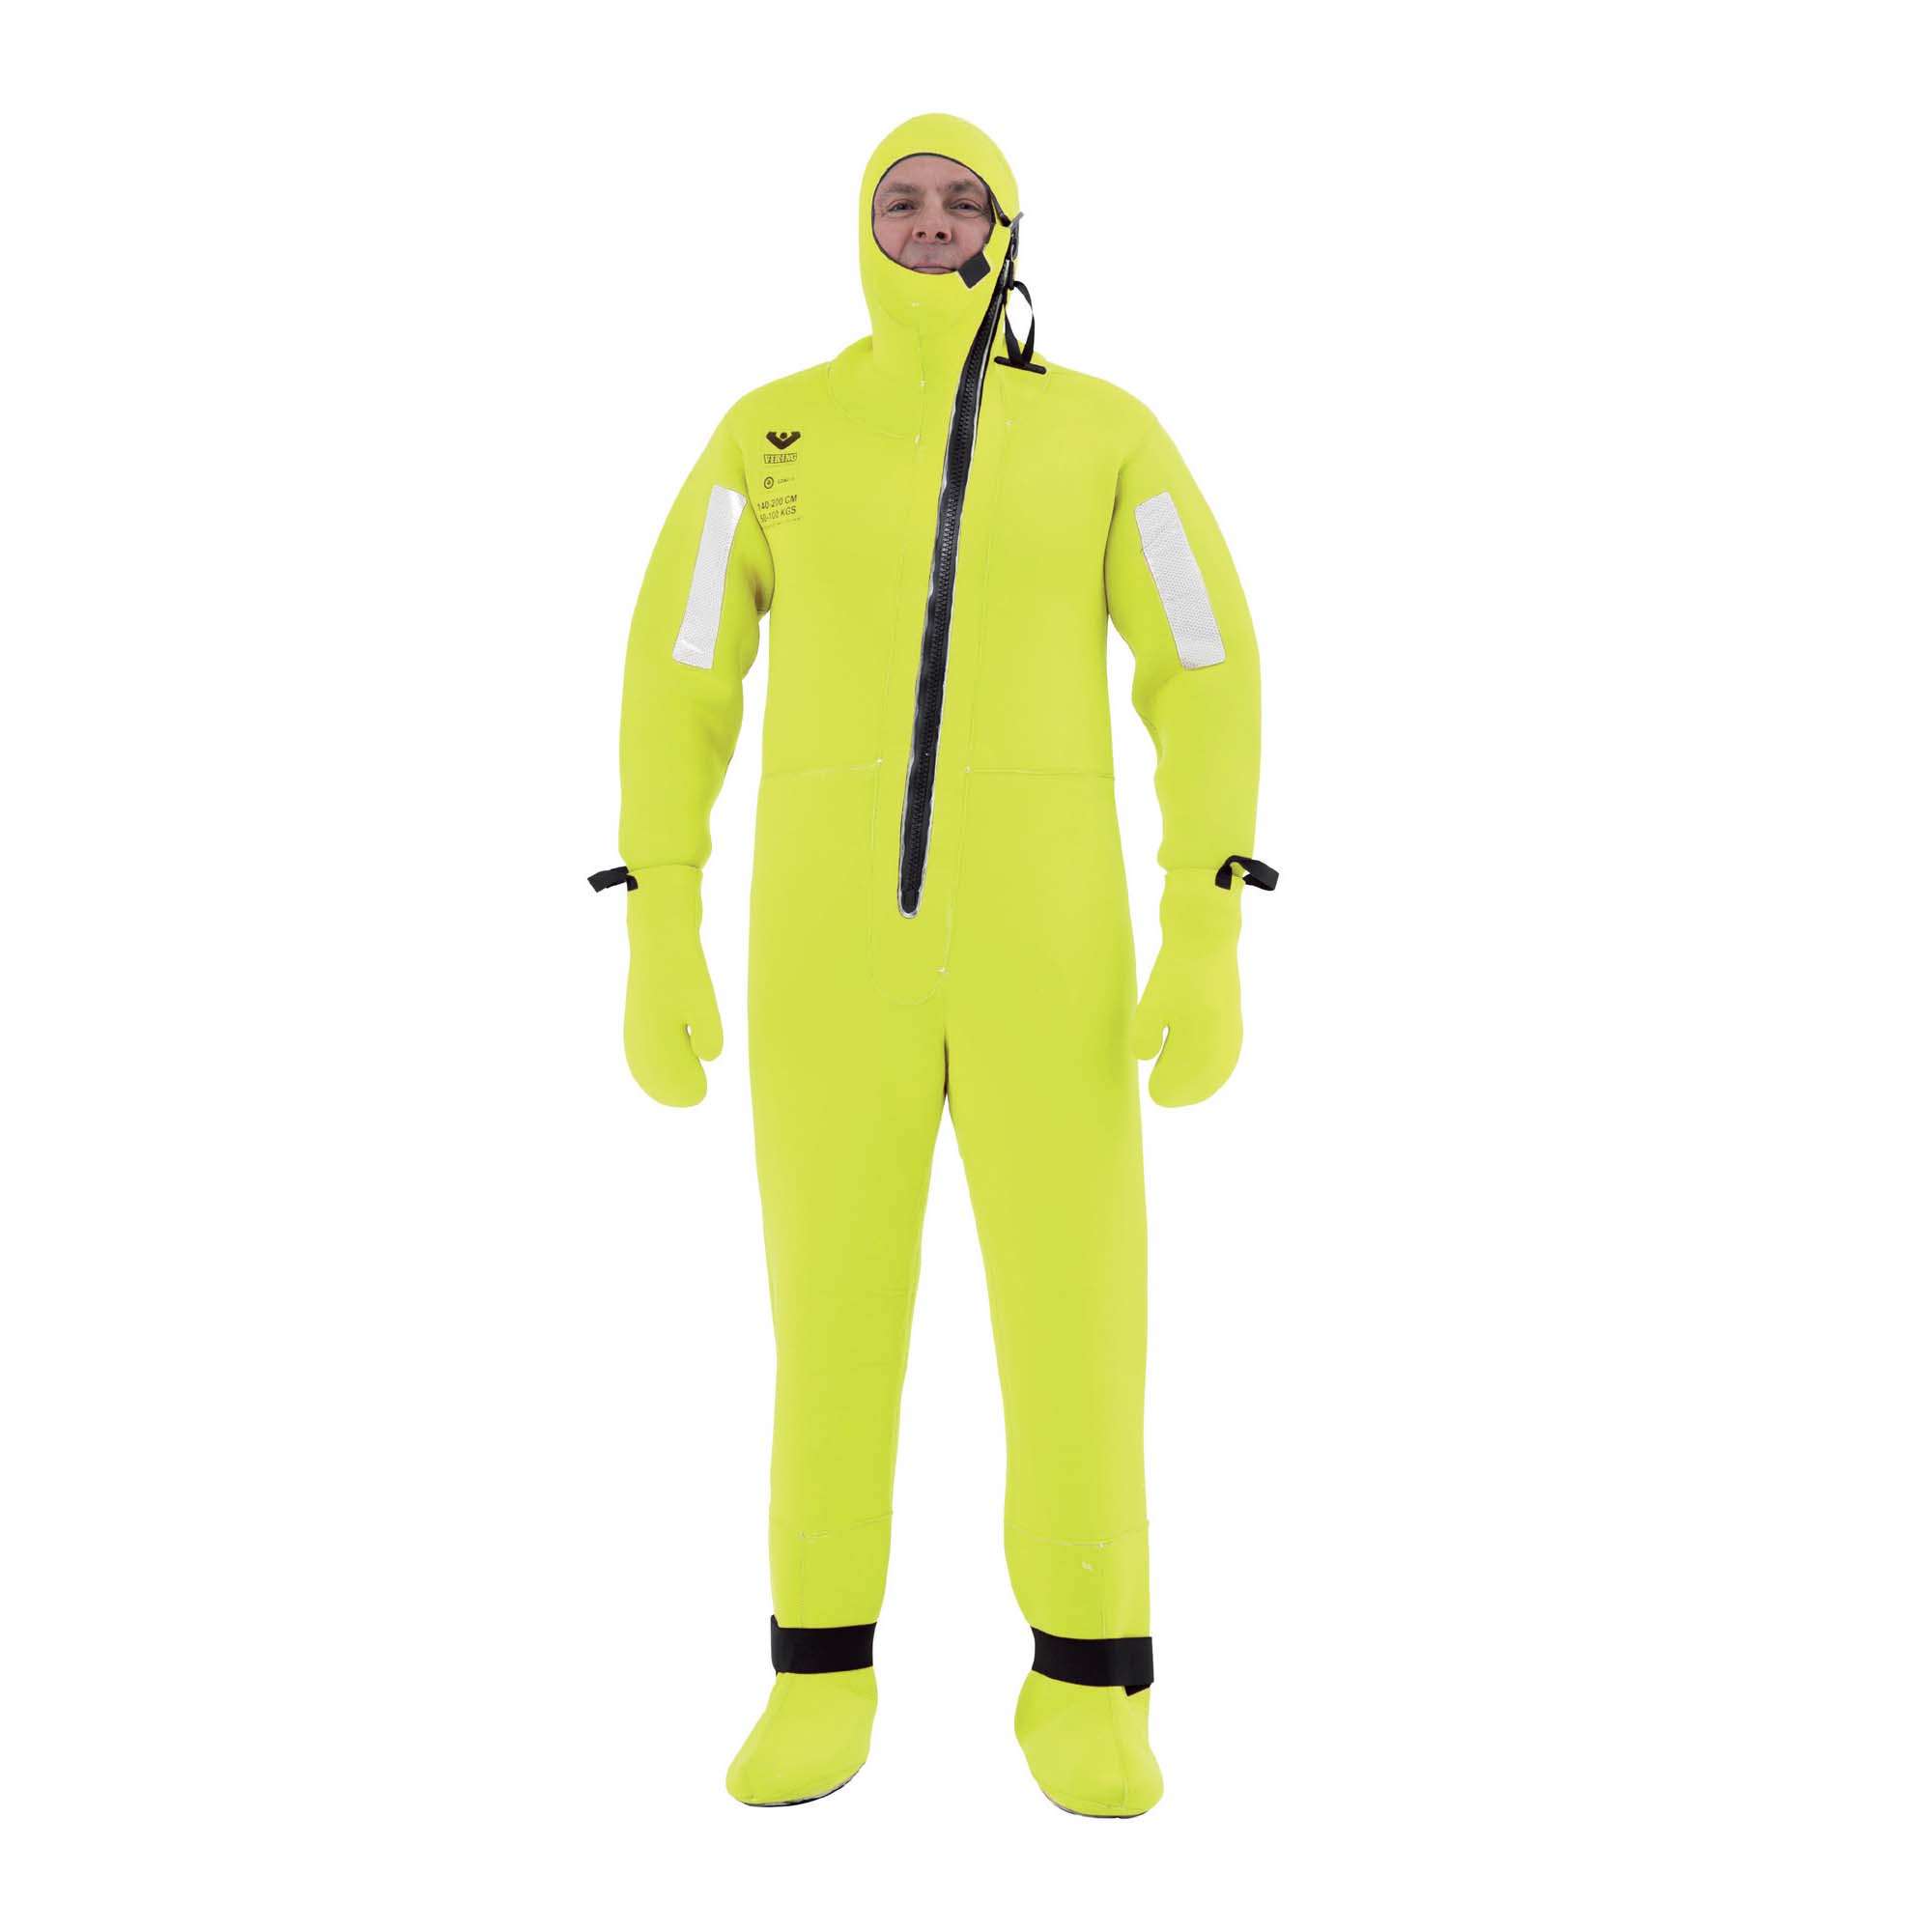 SG05500 Viking immersion suit YouSafe Wave PS2014 High-quality basic immersion suit approved according to SOLAS regulations. The VIKING YouSafeTM Wave provides good thermal protection combined with high visibility fabric to increase your chance of survival in an emergency.